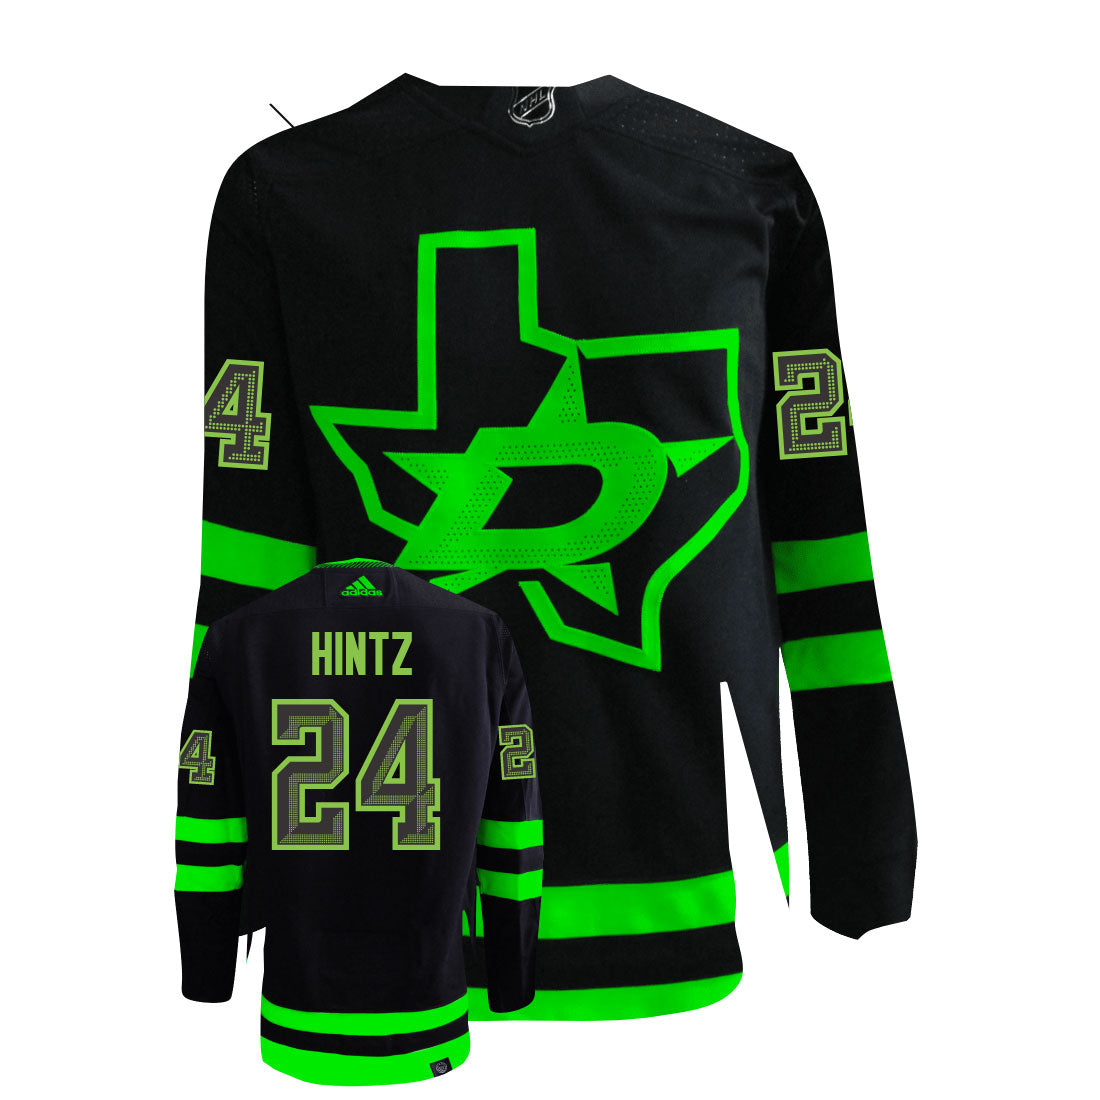 Roope Hintz Dallas Stars Adidas Primegreen Authentic Third Alternate NHL Hockey Jersey - Front/Back View